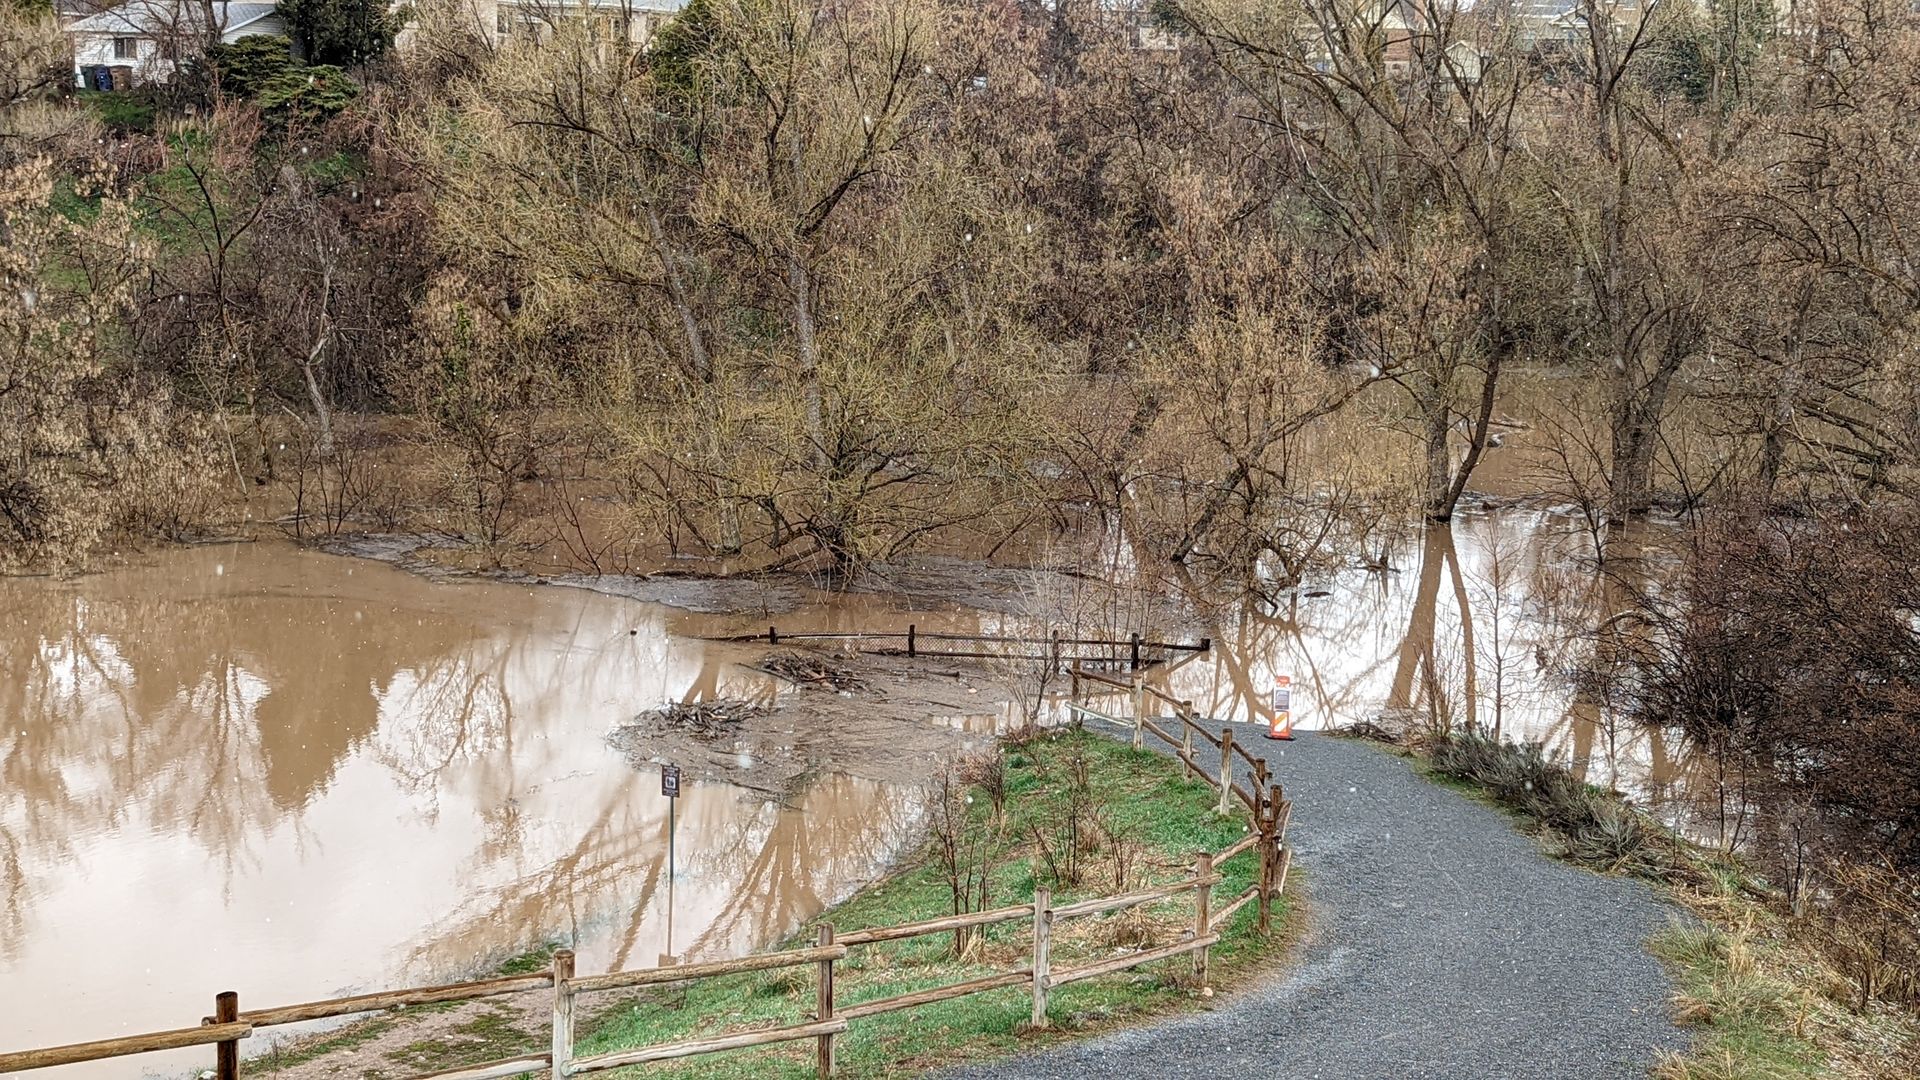 Muddy floodwaters over a road and fences in a woody drainage.